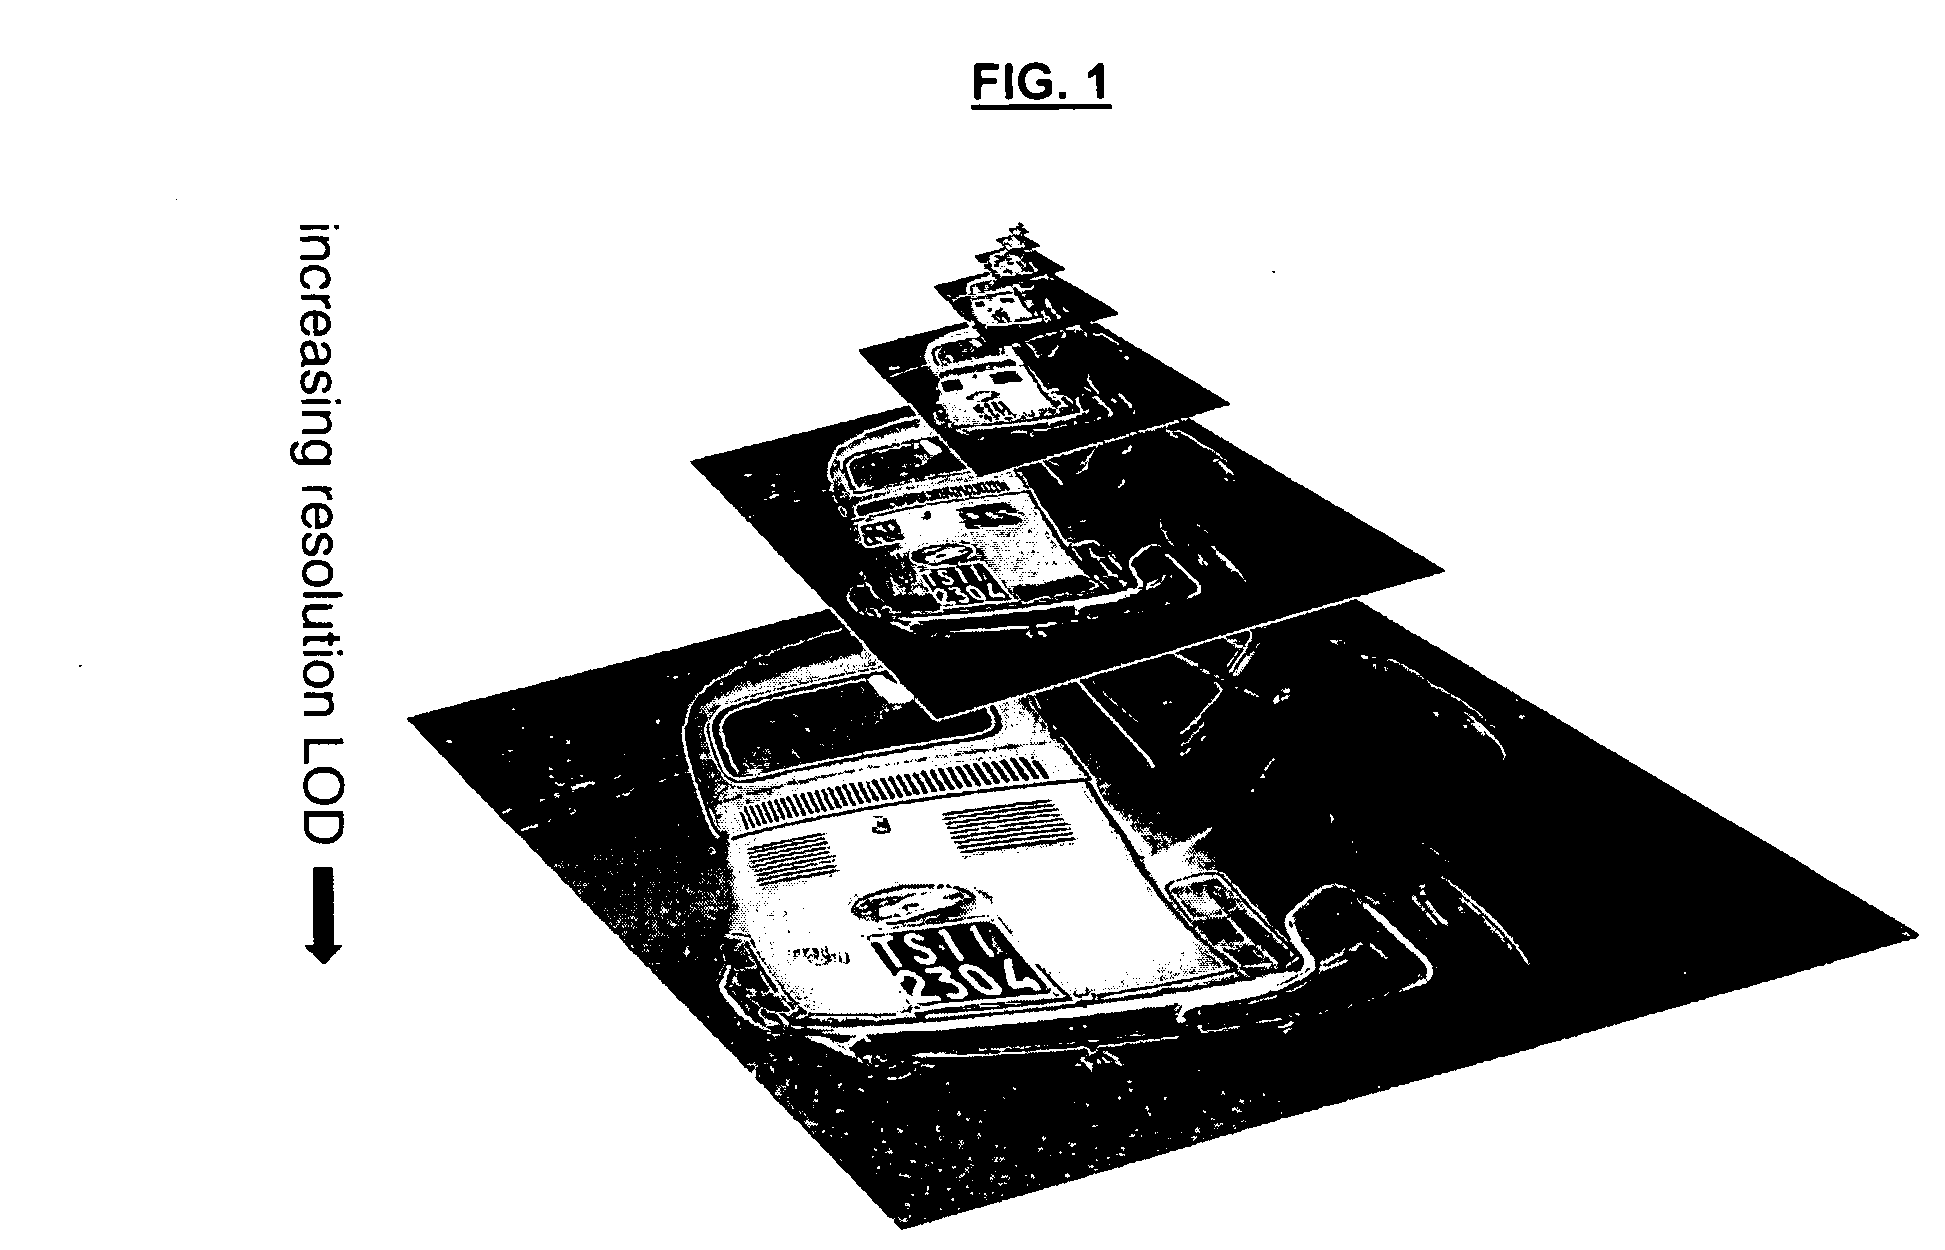 System and method for exact rendering in a zooming user interface